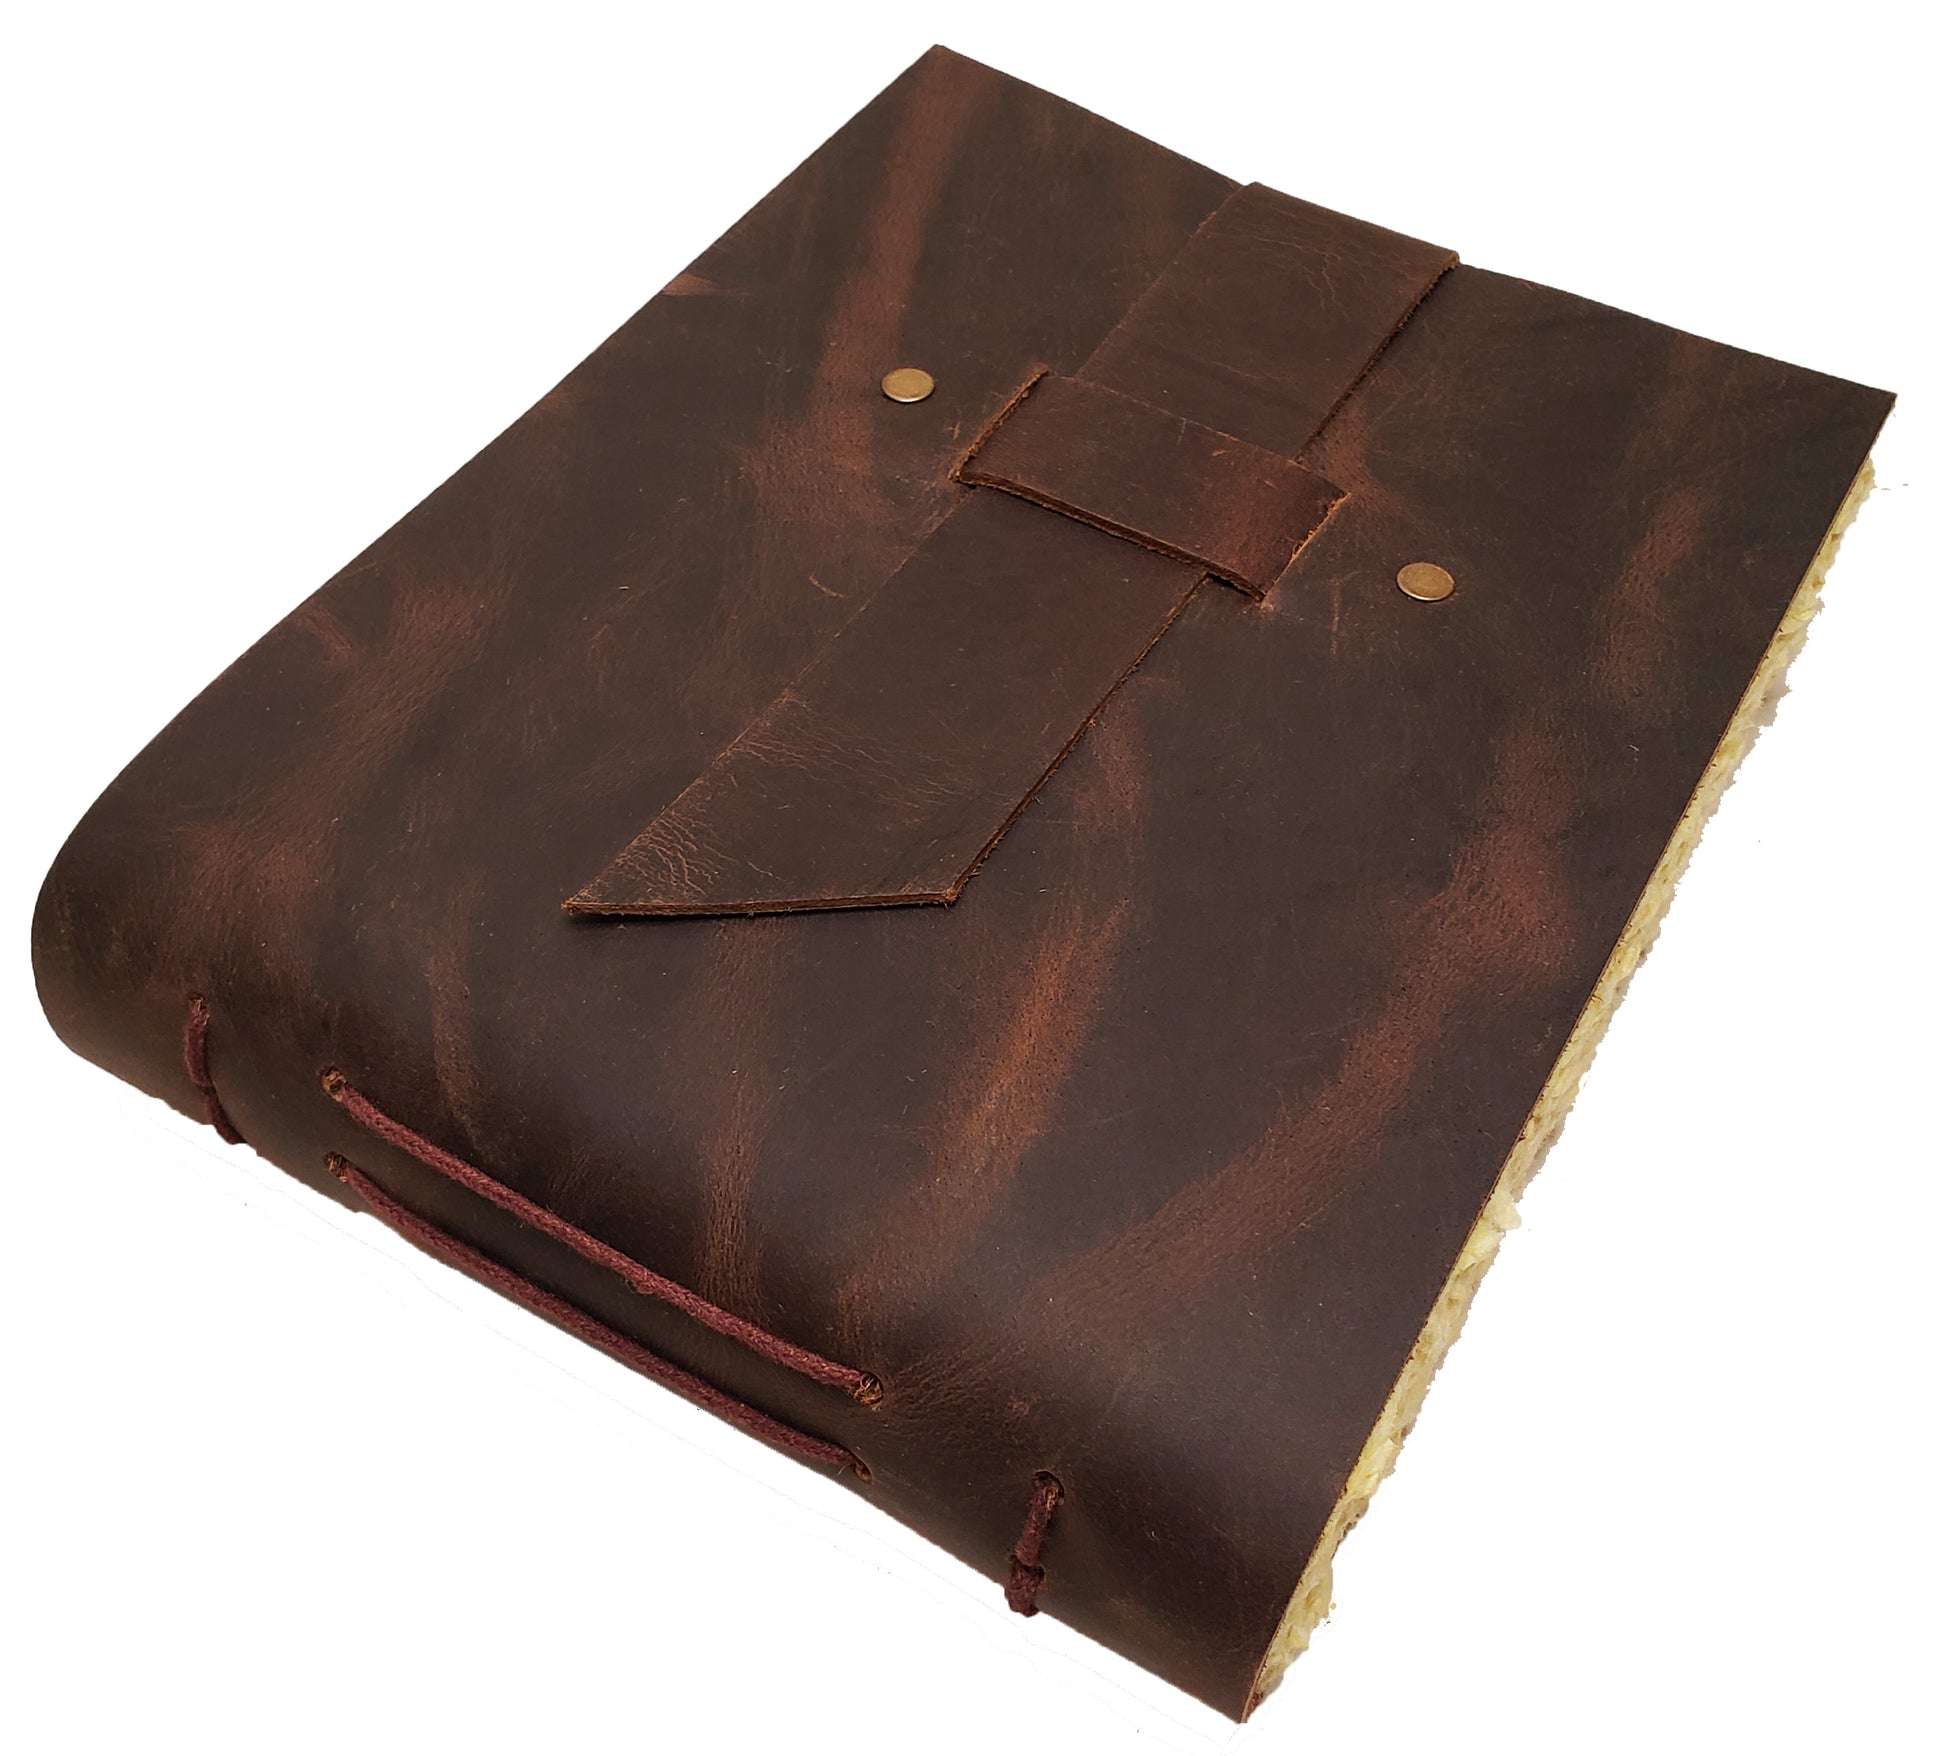 Vintage Leather Photo Album with Buckle Closure - Scrapbook Style Pages, Gift Box Included - Holds 100 4x6 or 5x7 Photos - Memory Book